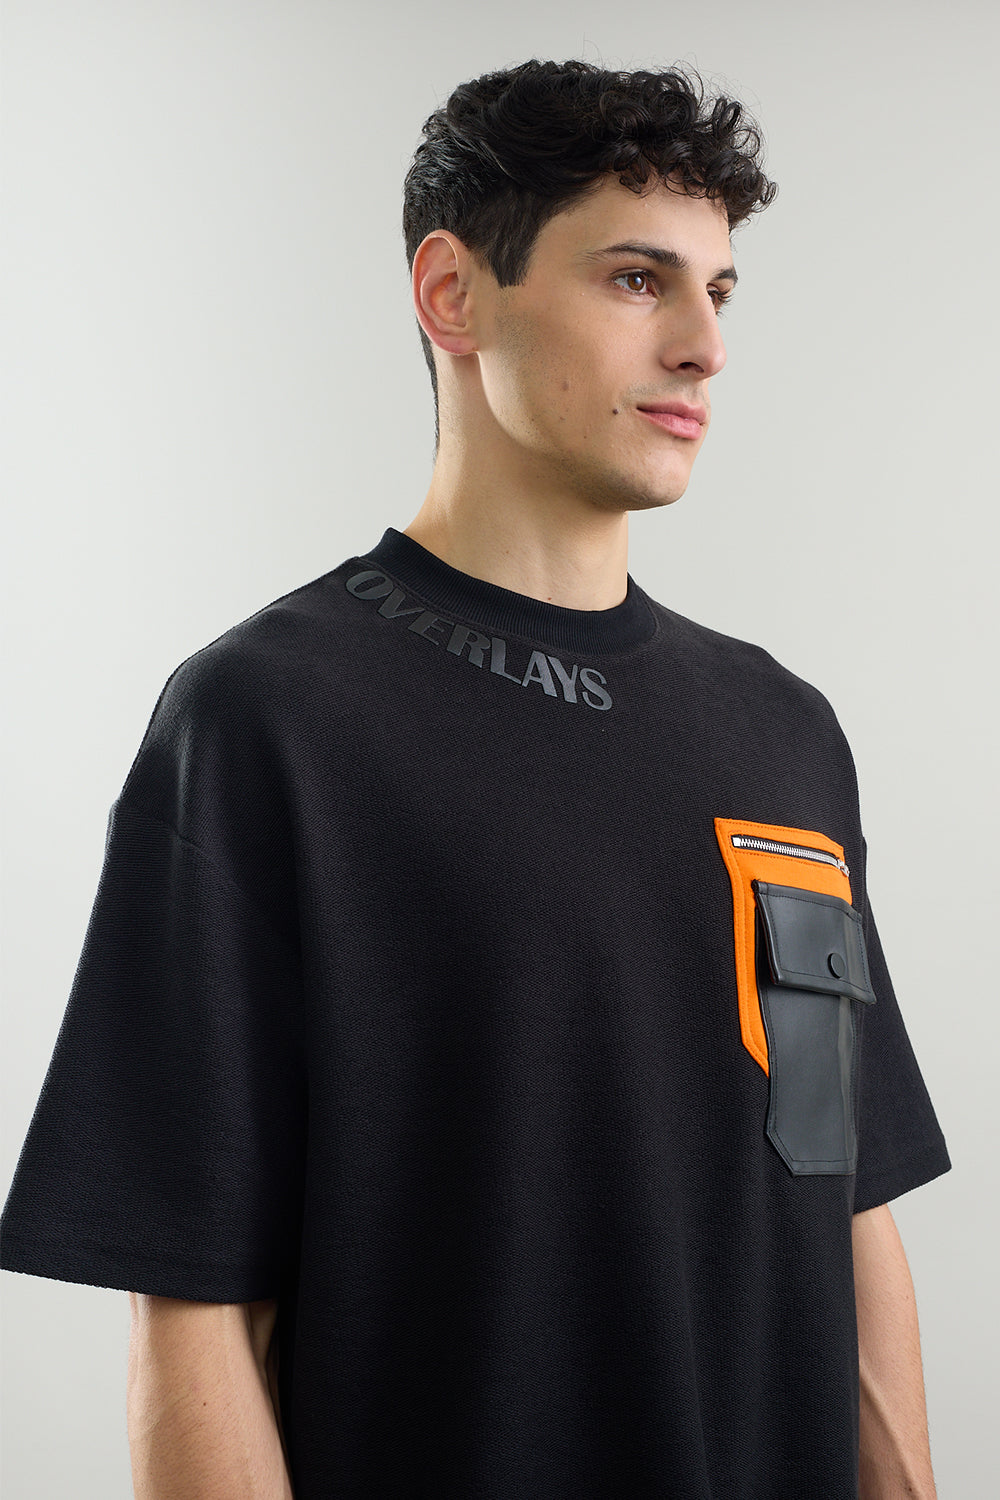 Black Arc Oversized T-shirt With Rexin Pocket